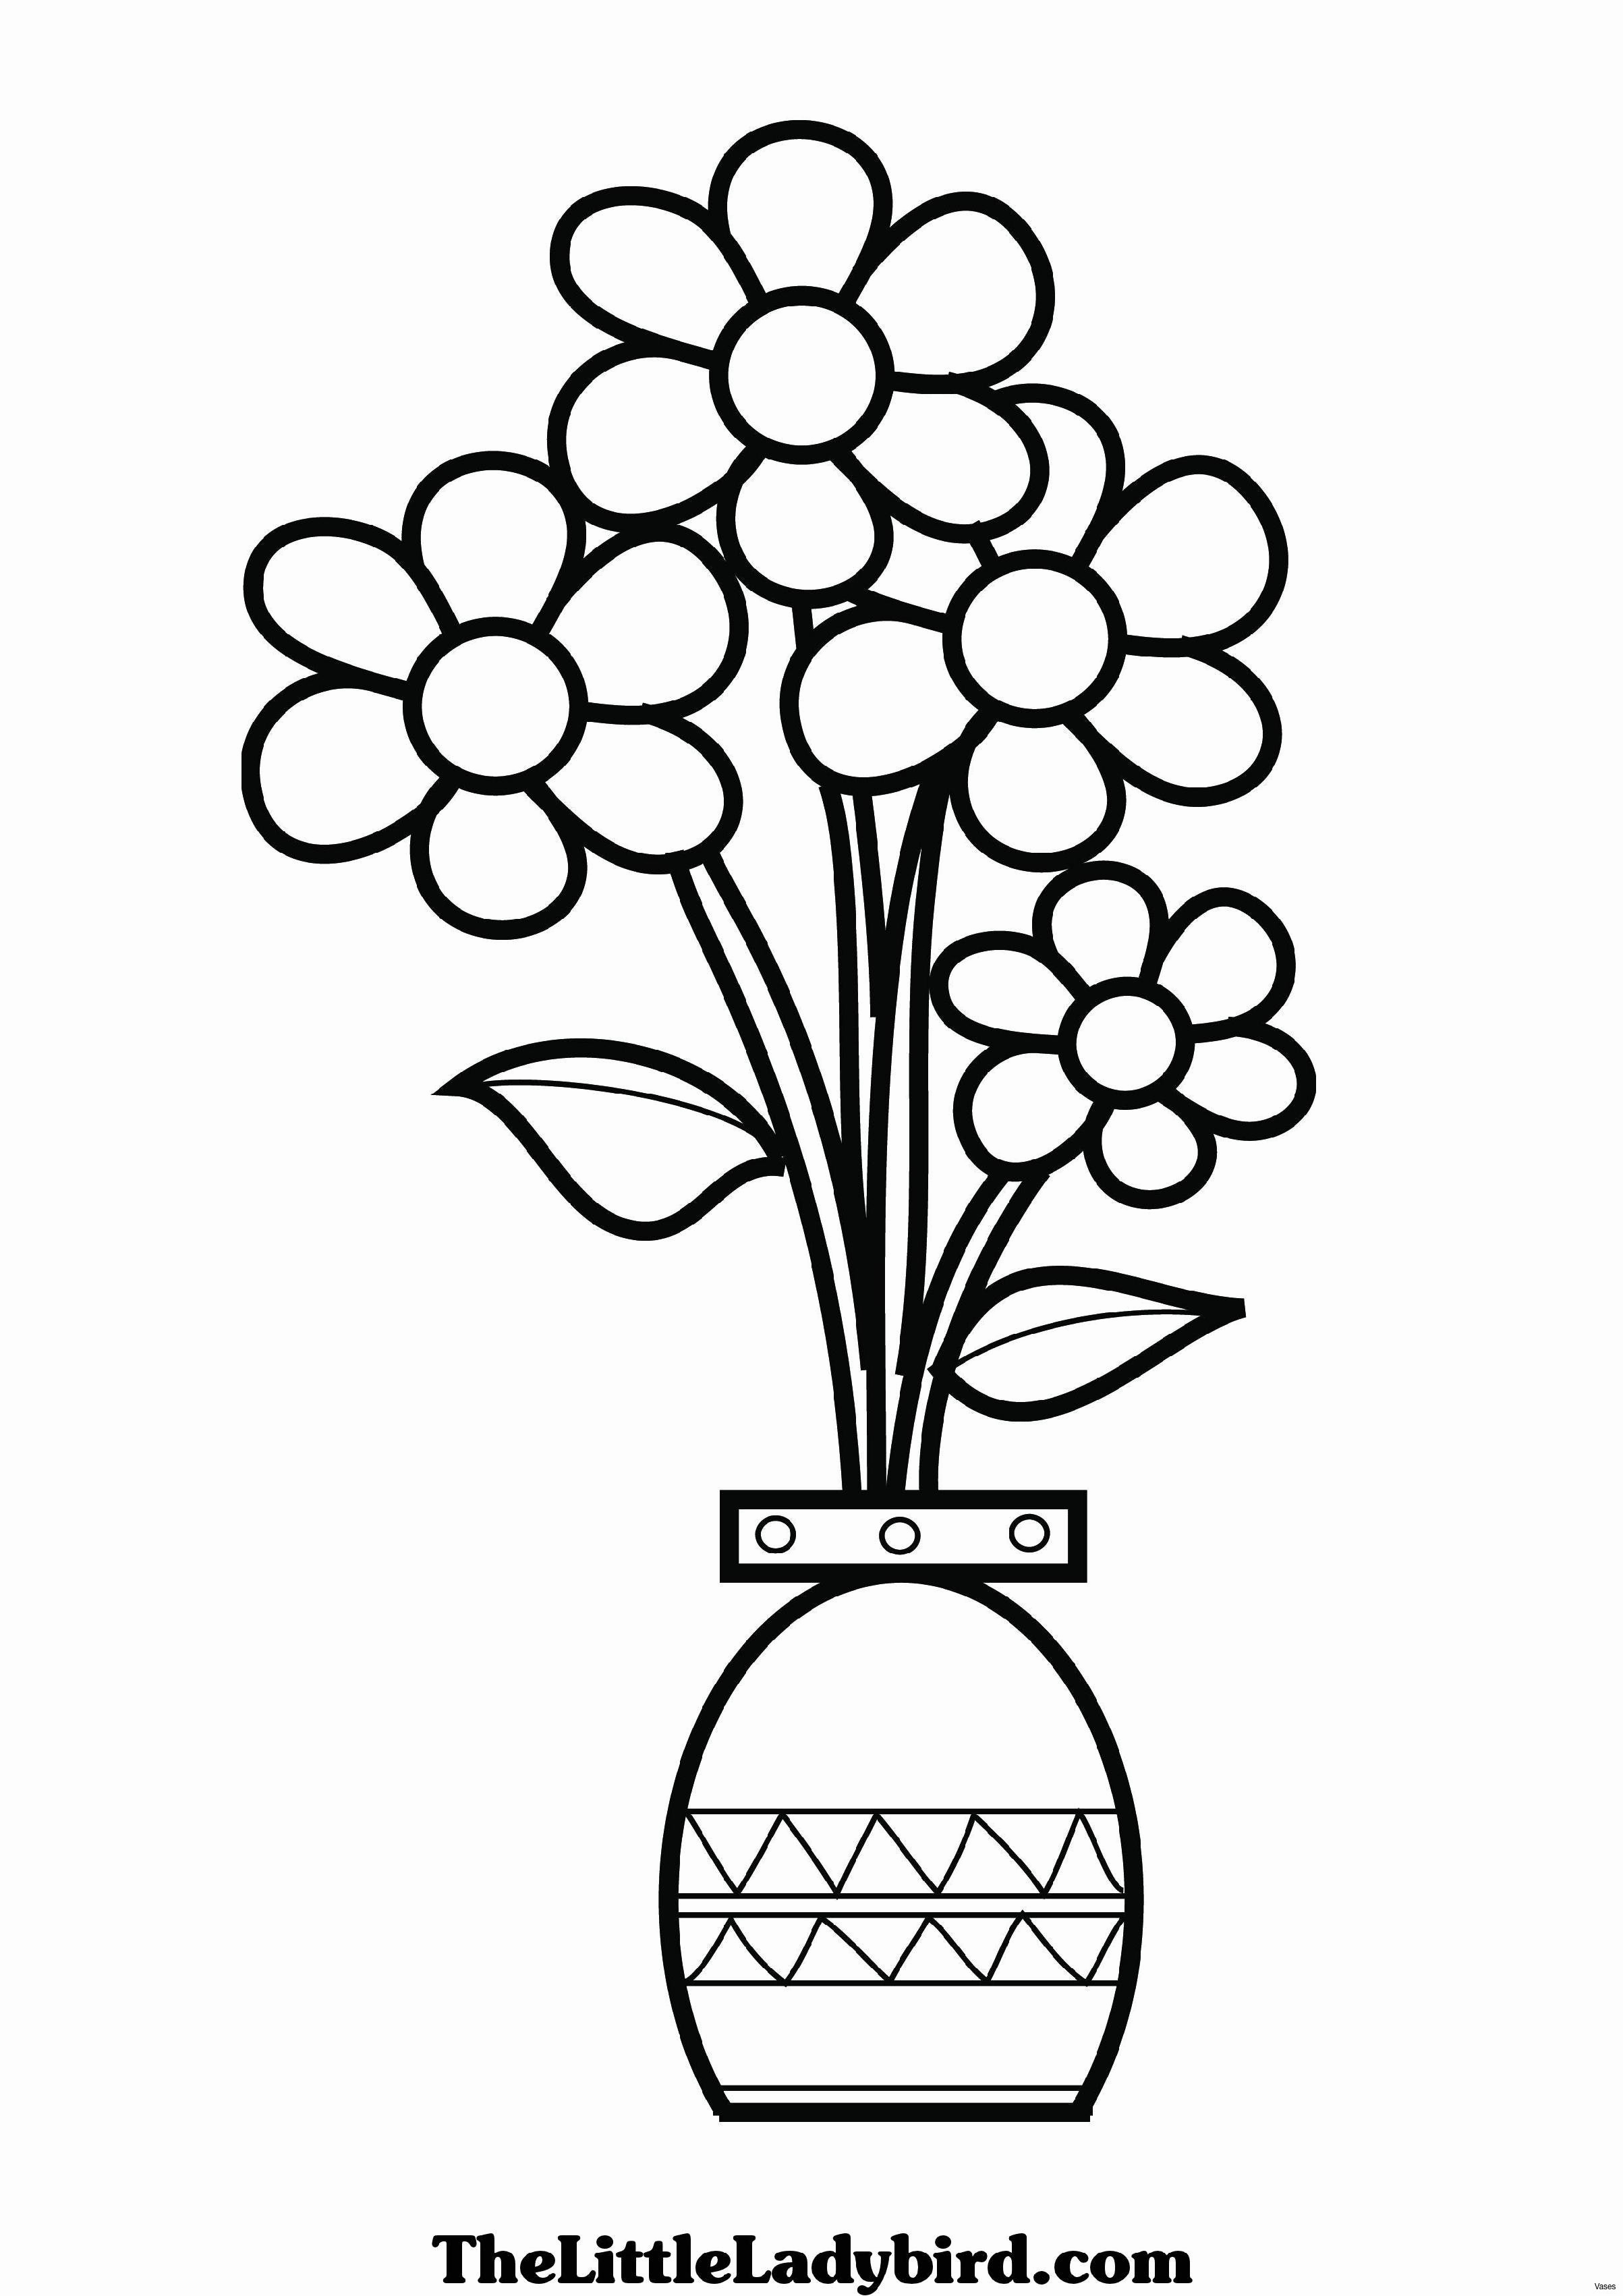 Colouring Pages Flowers In A Vase لم يسبق له مثيل الصور Tier3 Xyz